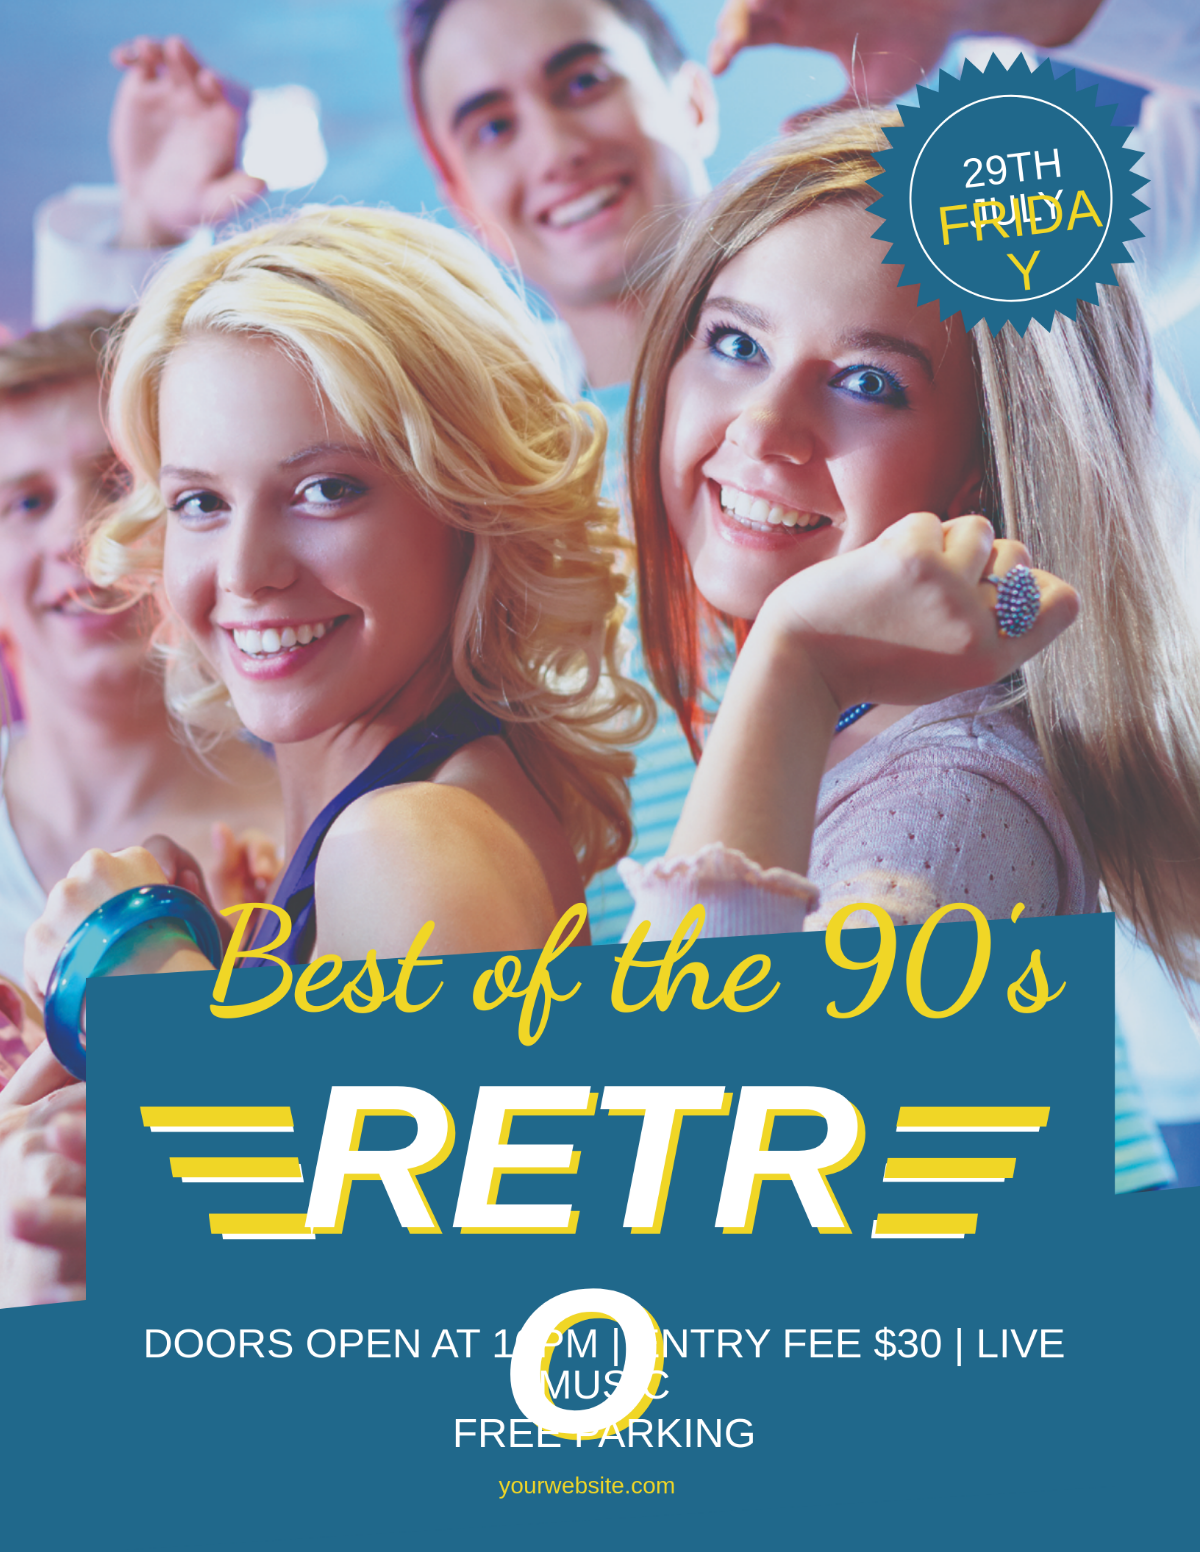 Free Cool Retro Style Flyer Template